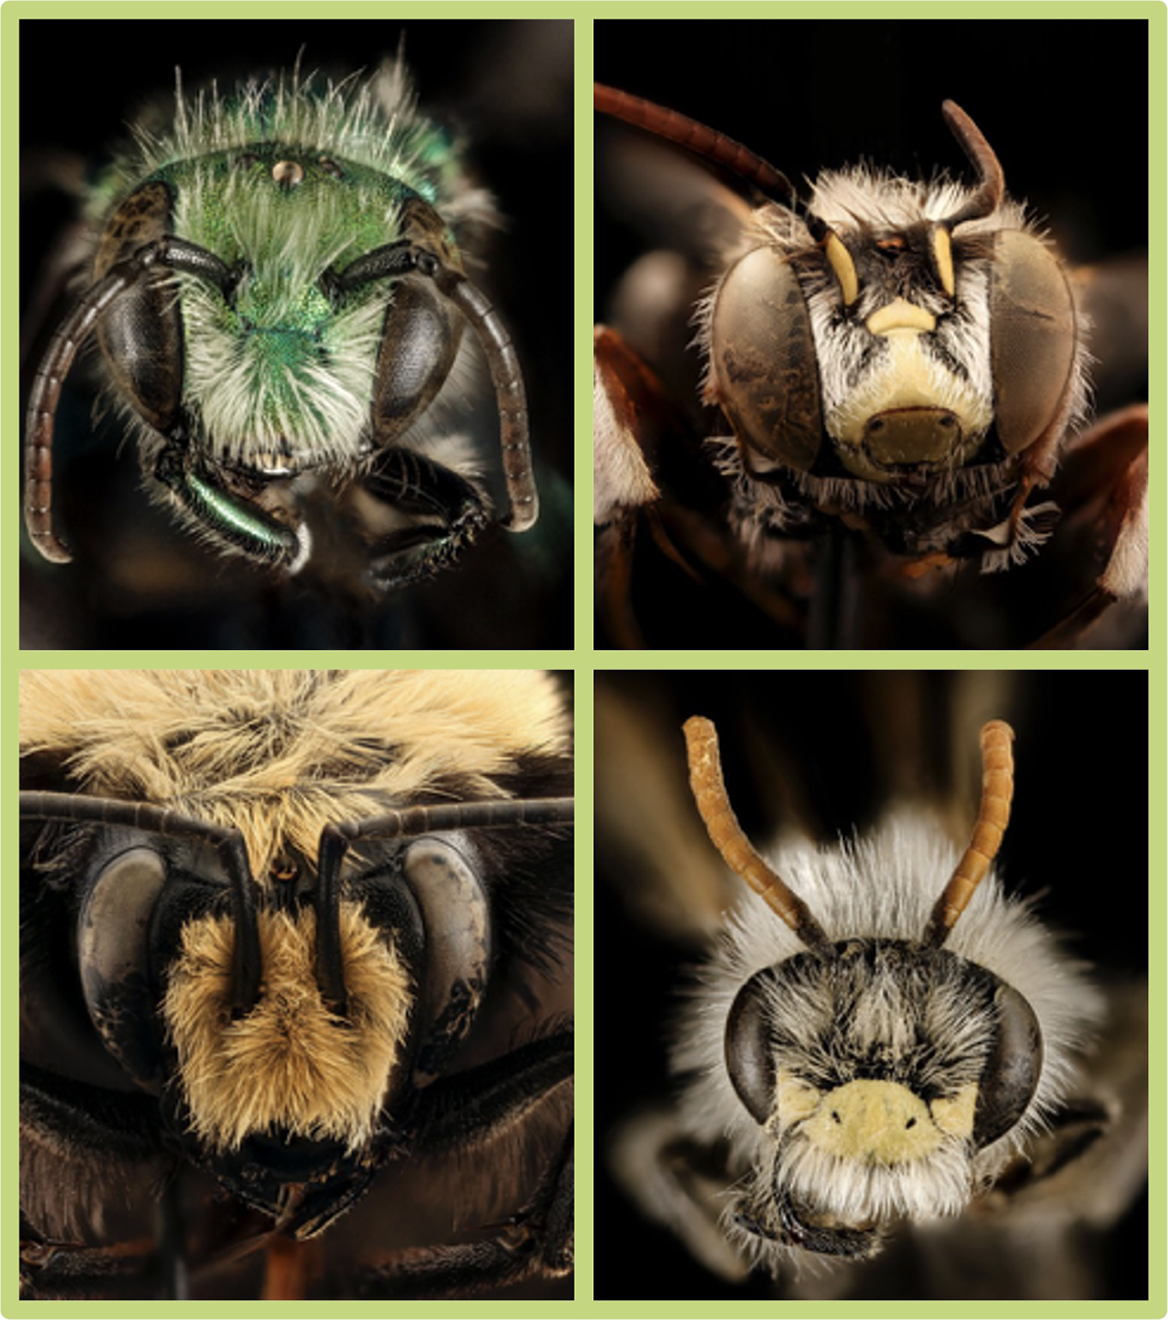 Close-ups of bee faces